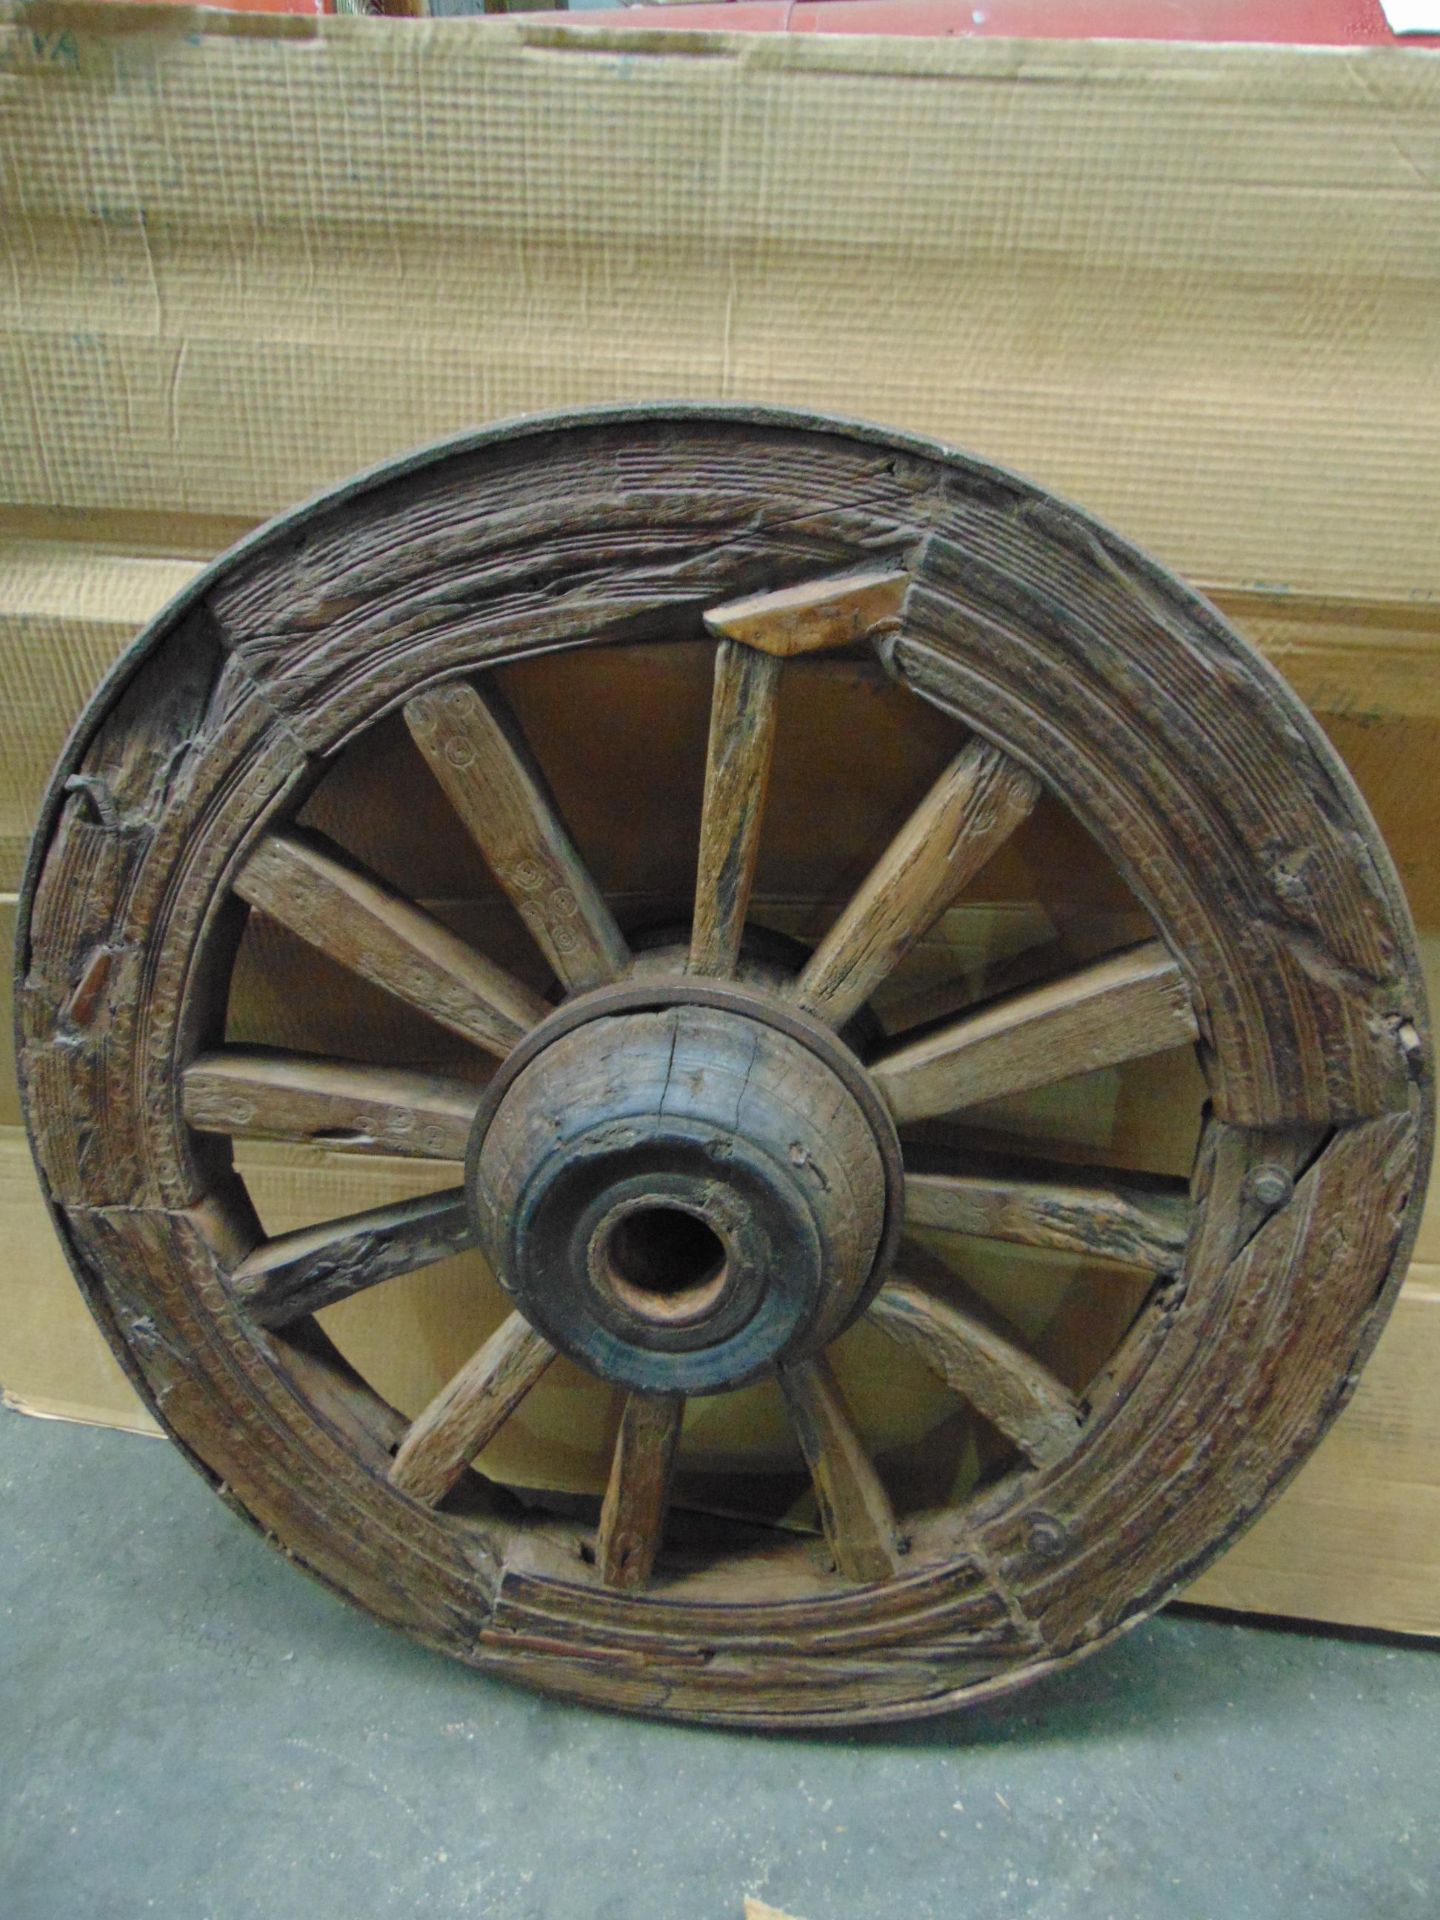 VERY RARE ANTIQUE WOODEN WAGON WHEEL WITH STEEL RIM, WOODEN SPOKES - 85 CMS